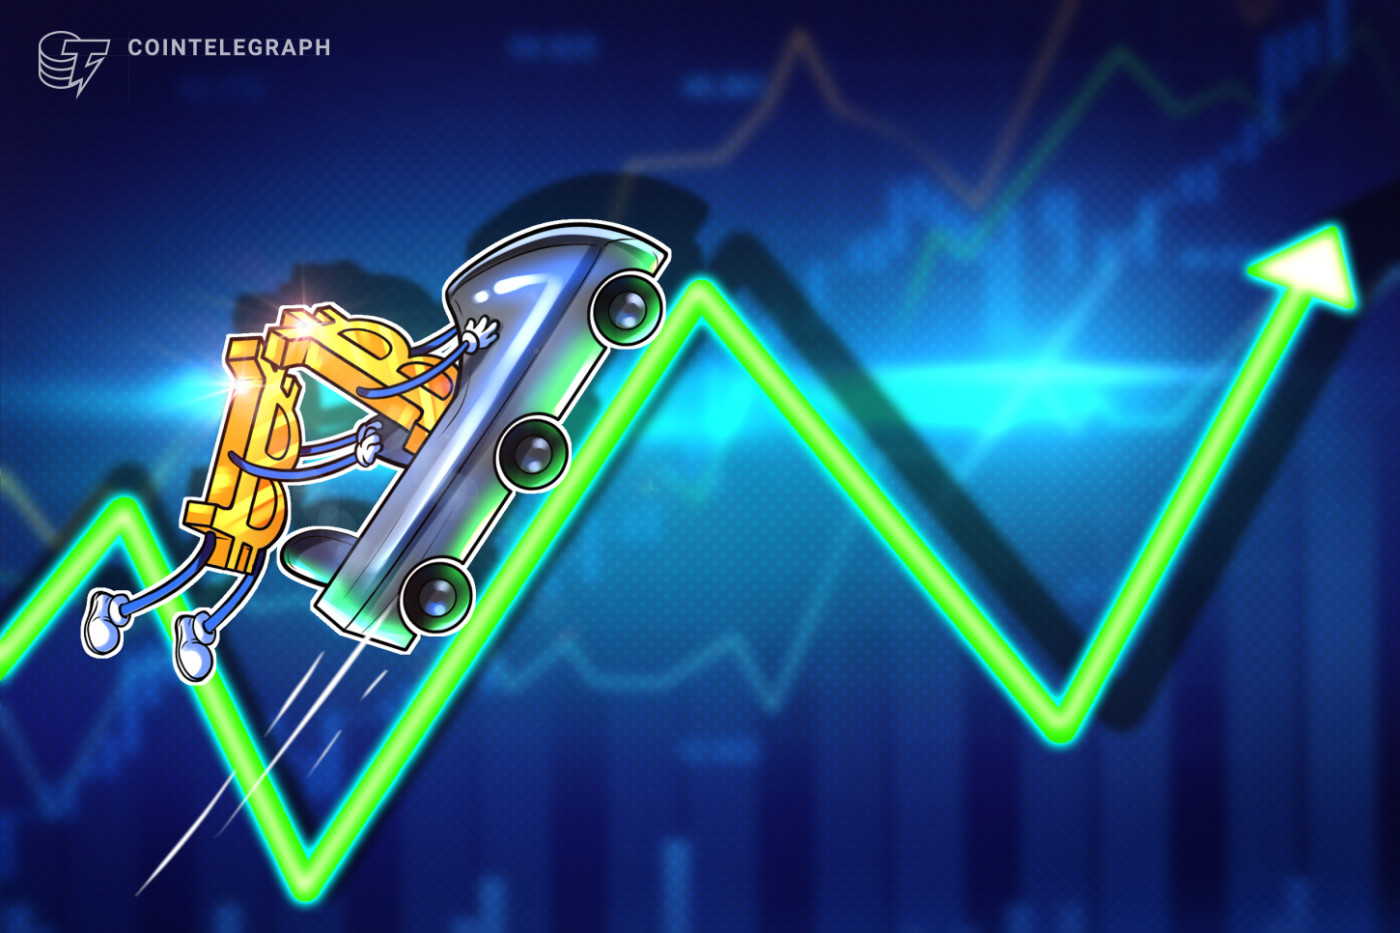 BTC price ‘absolutely primed’ to gain, says trader, as Bitcoin eyes $45K